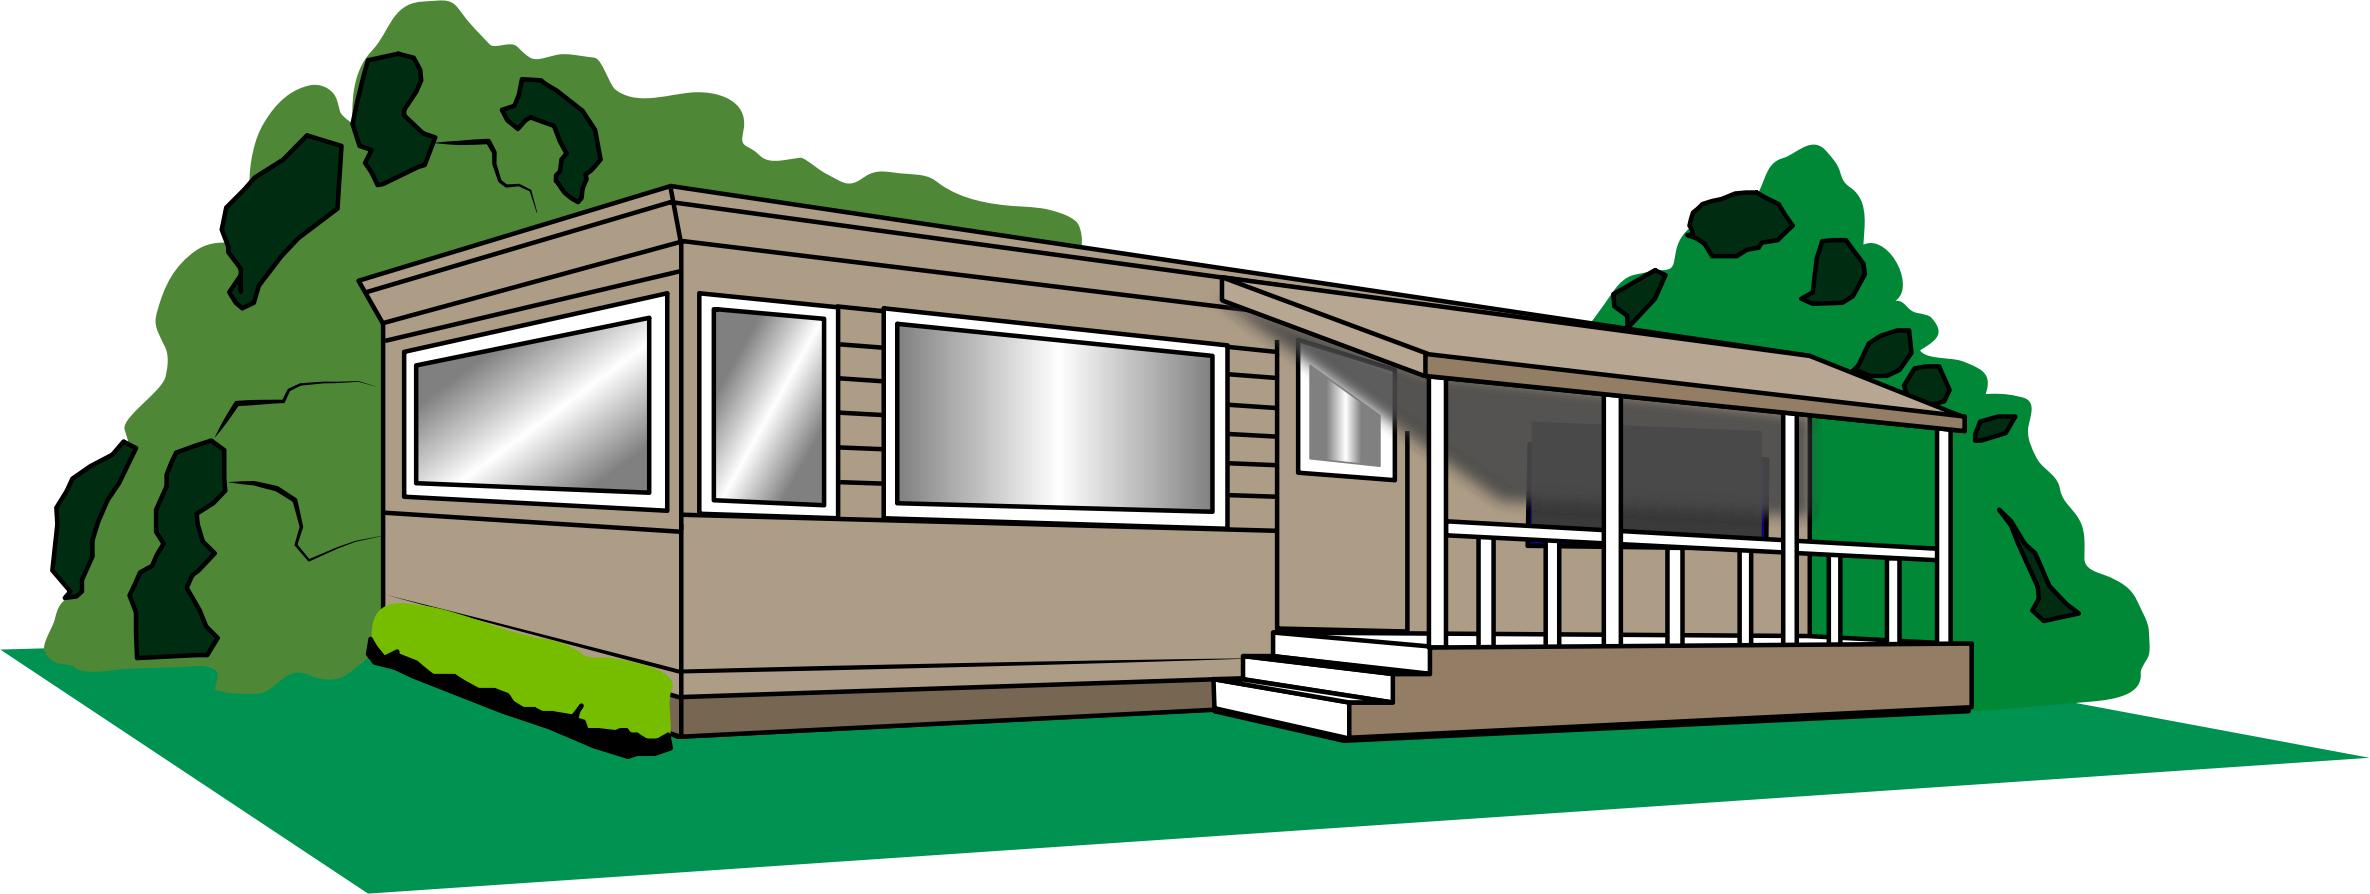 mobile home png